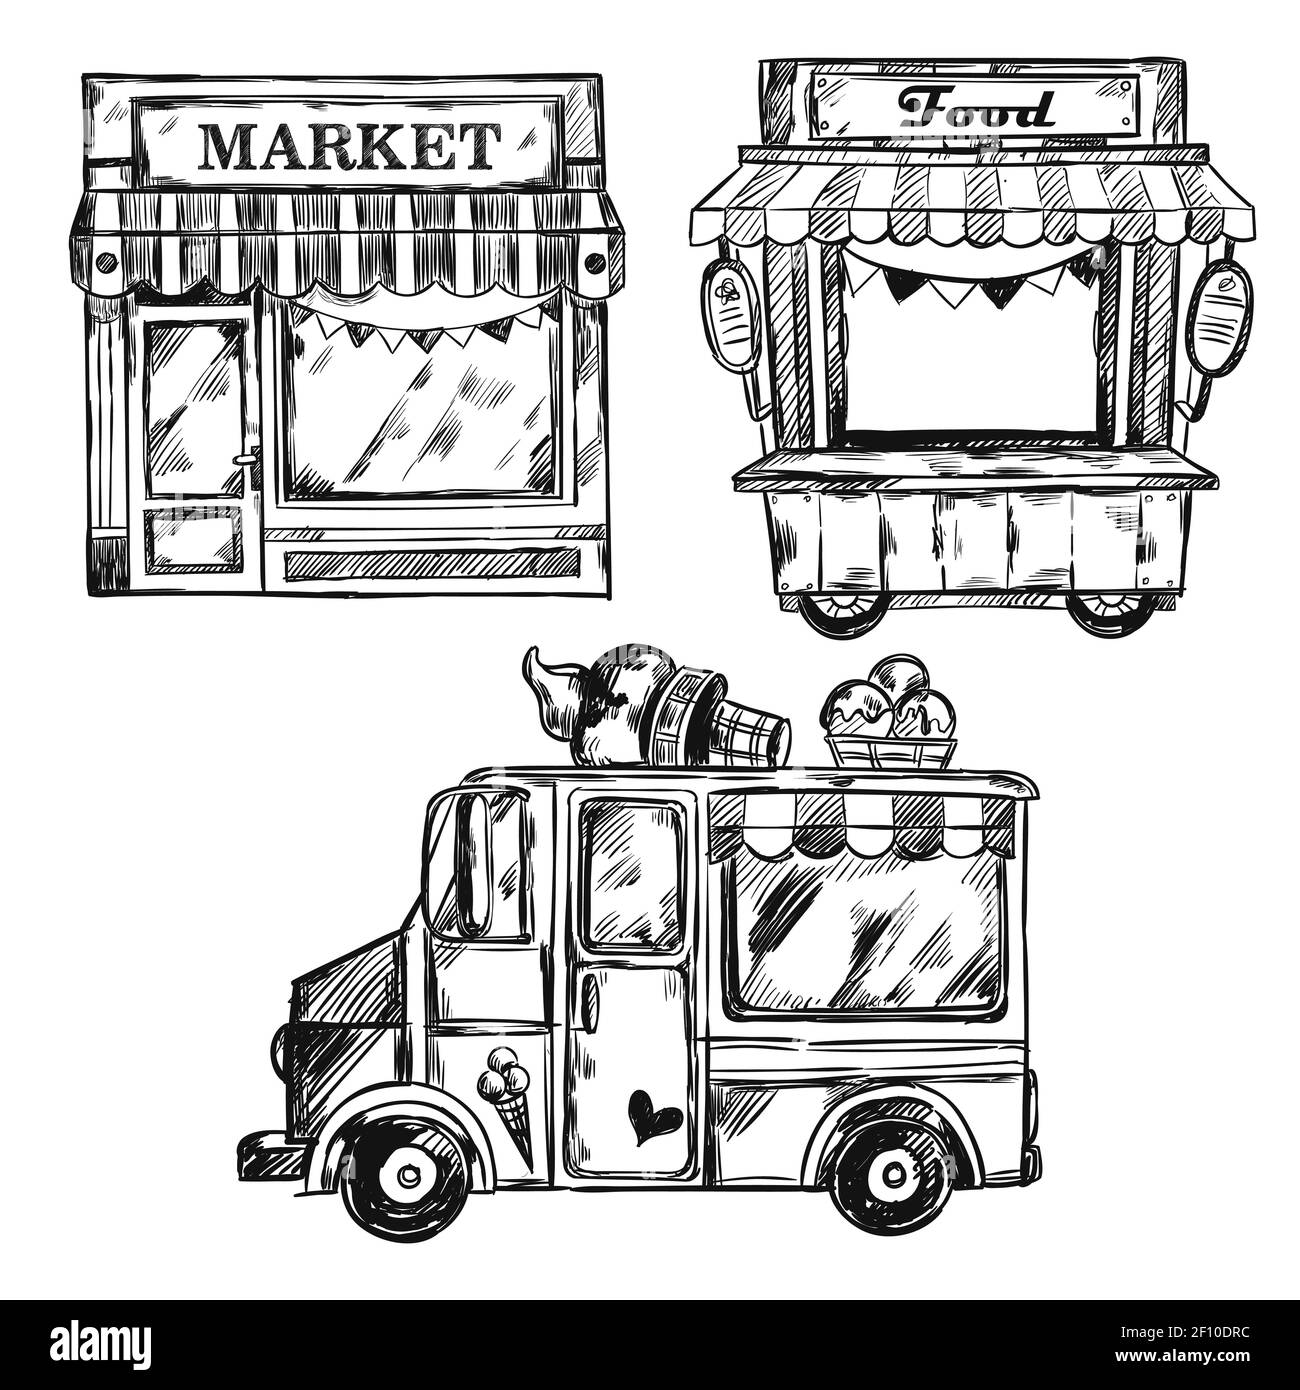 Vintage shop facade icon set with different types of food markets in black color vector illustration Stock Vector